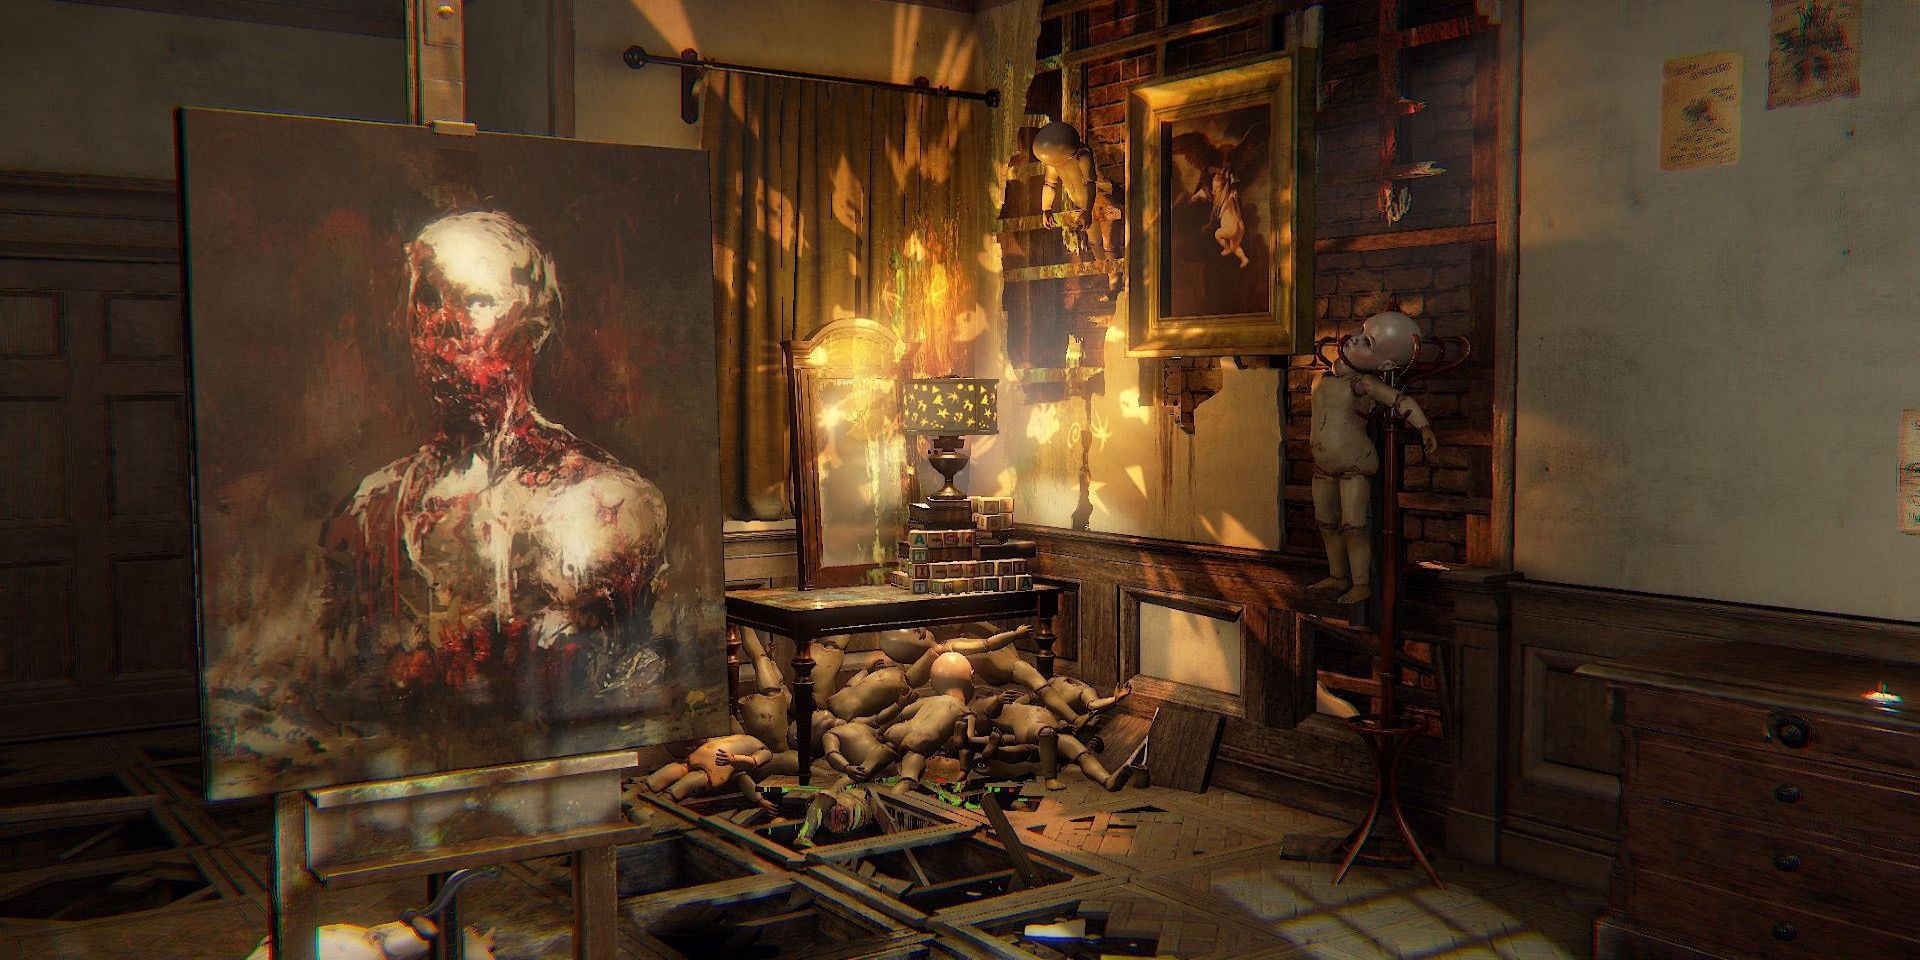 A screenshot from the 2016 indie horror game Layers of Fear.